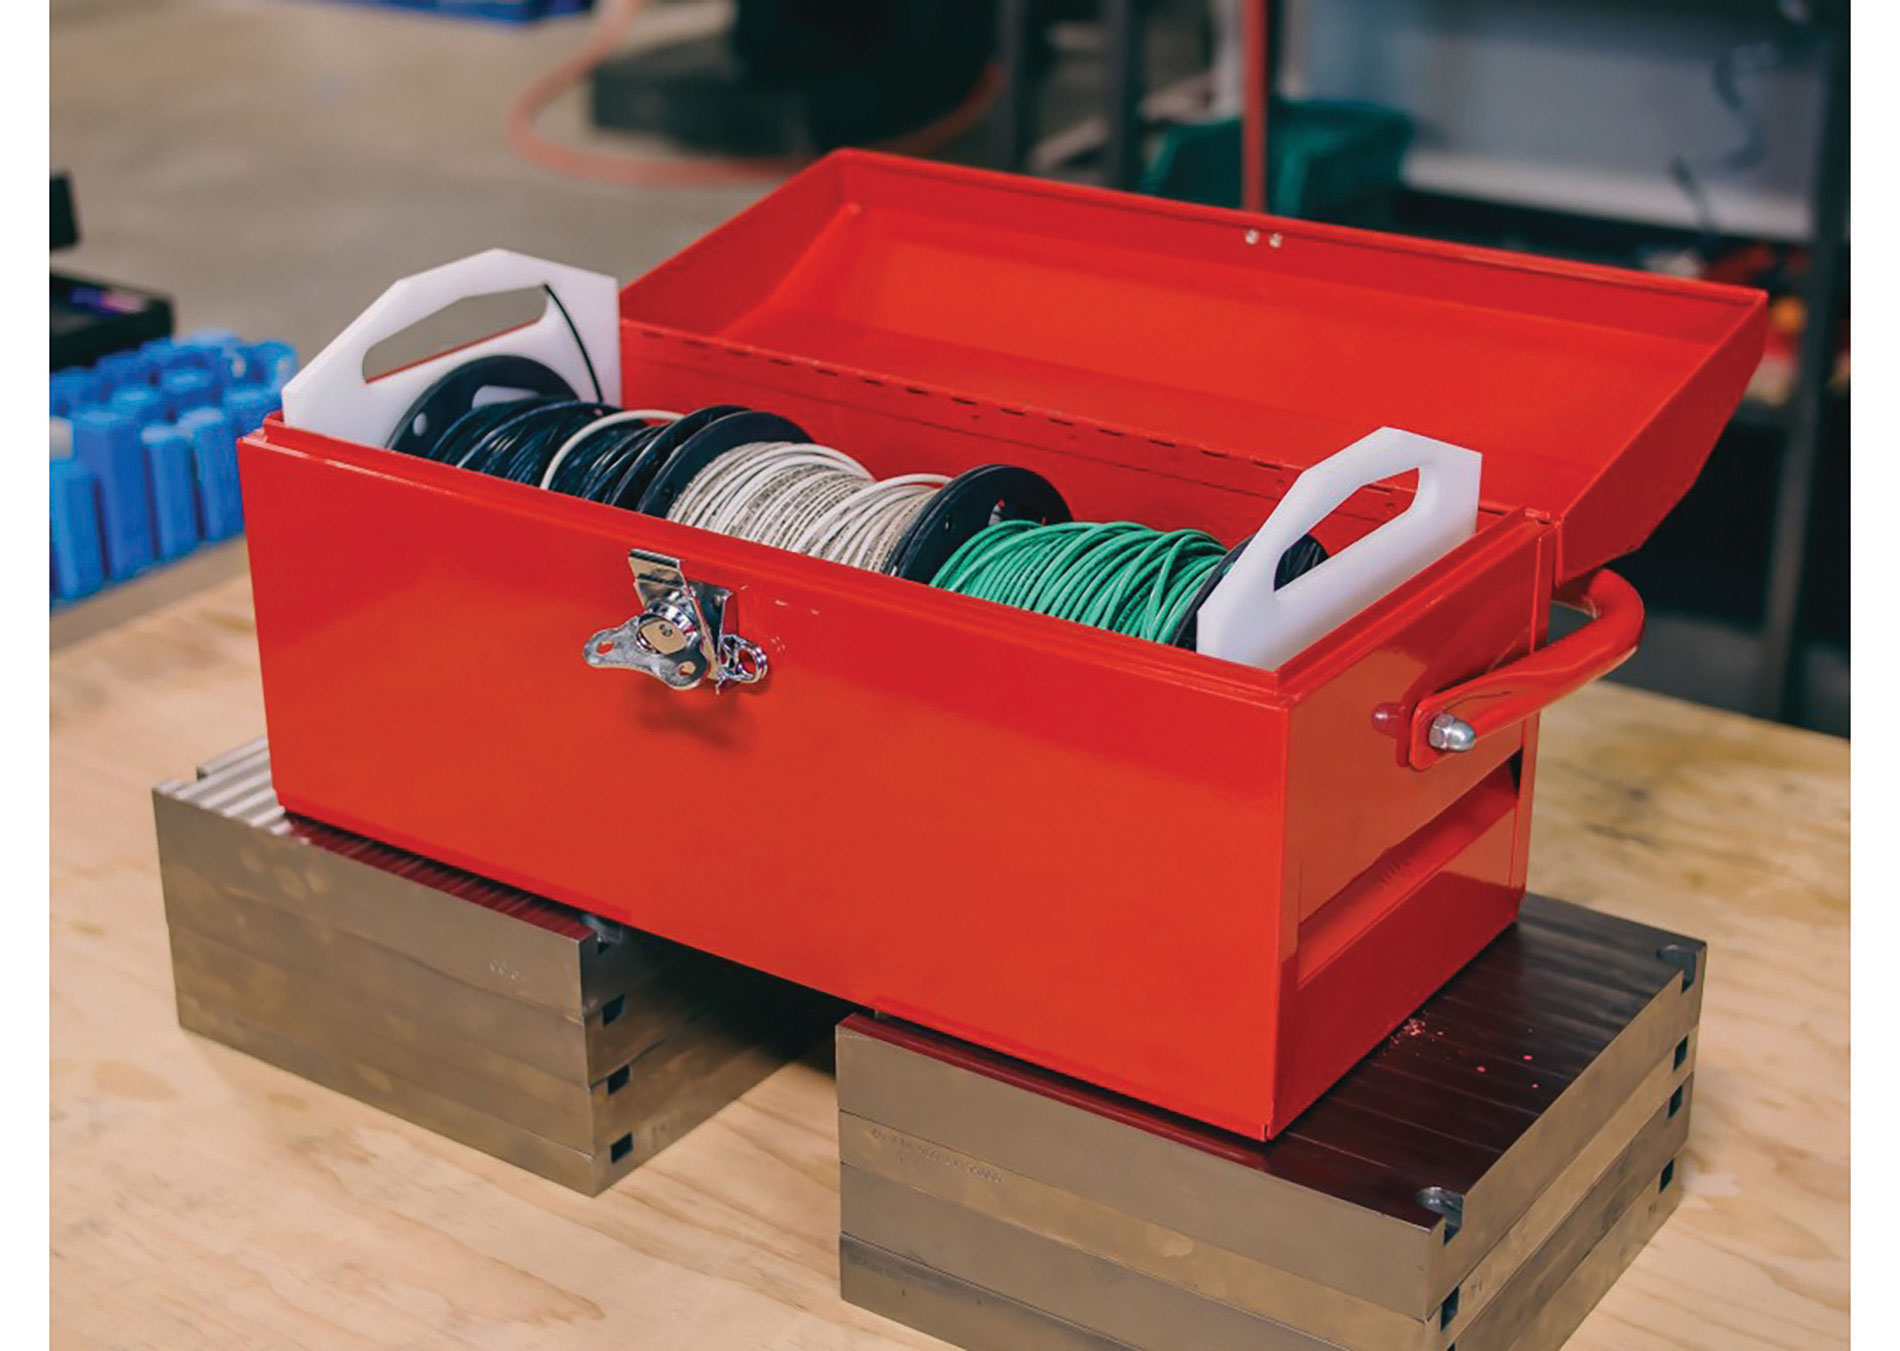 Wyerbox's Cable Storage Box